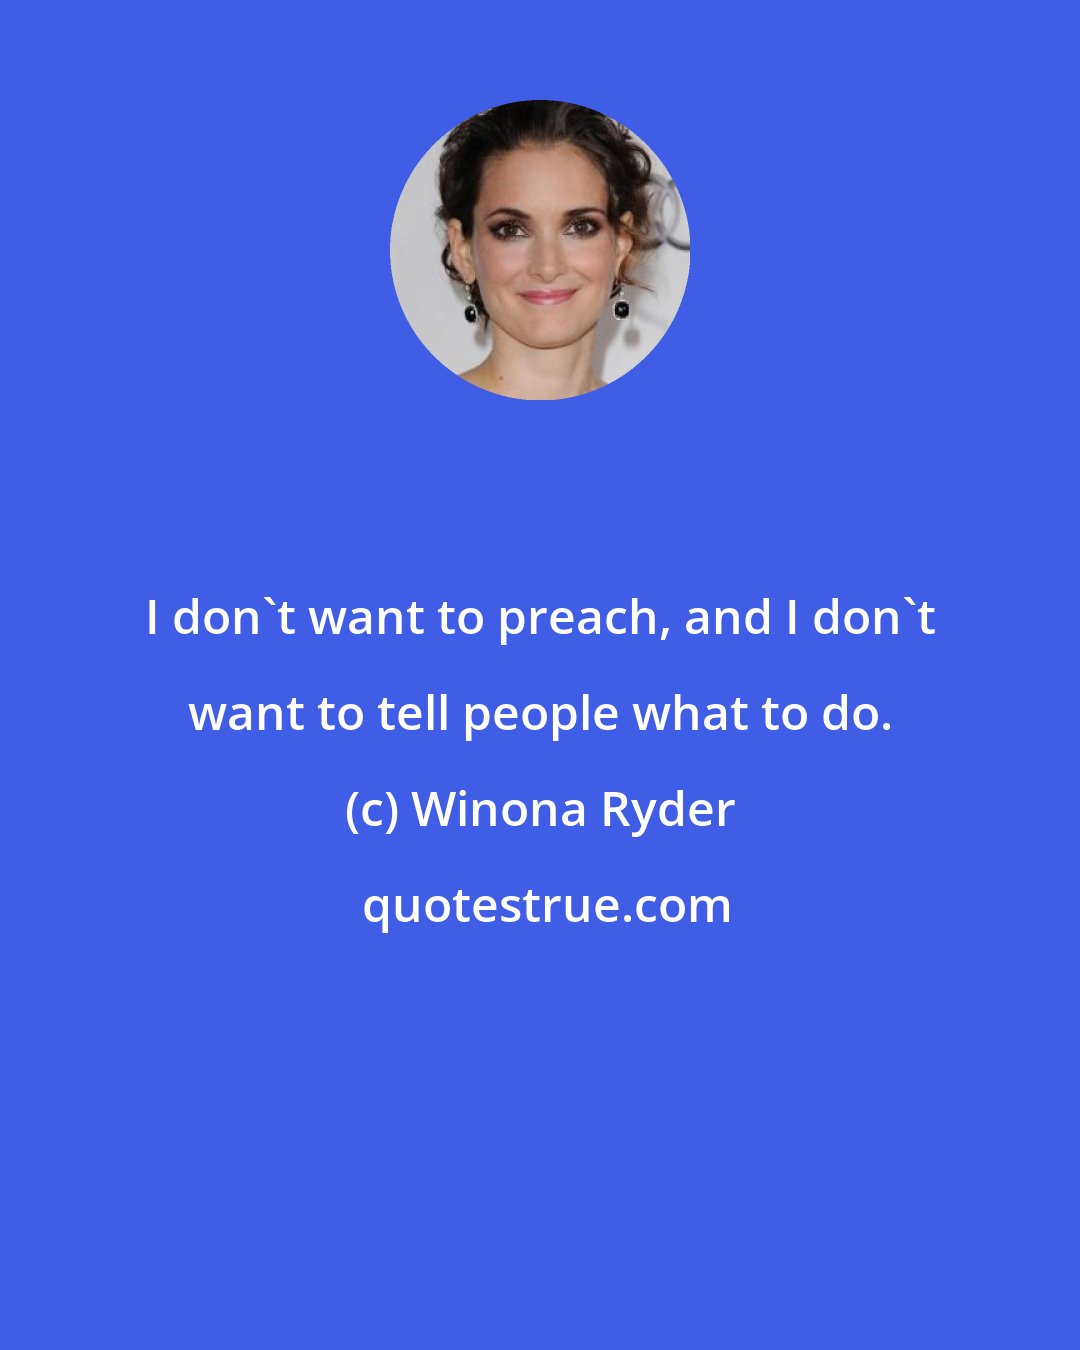 Winona Ryder: I don't want to preach, and I don't want to tell people what to do.